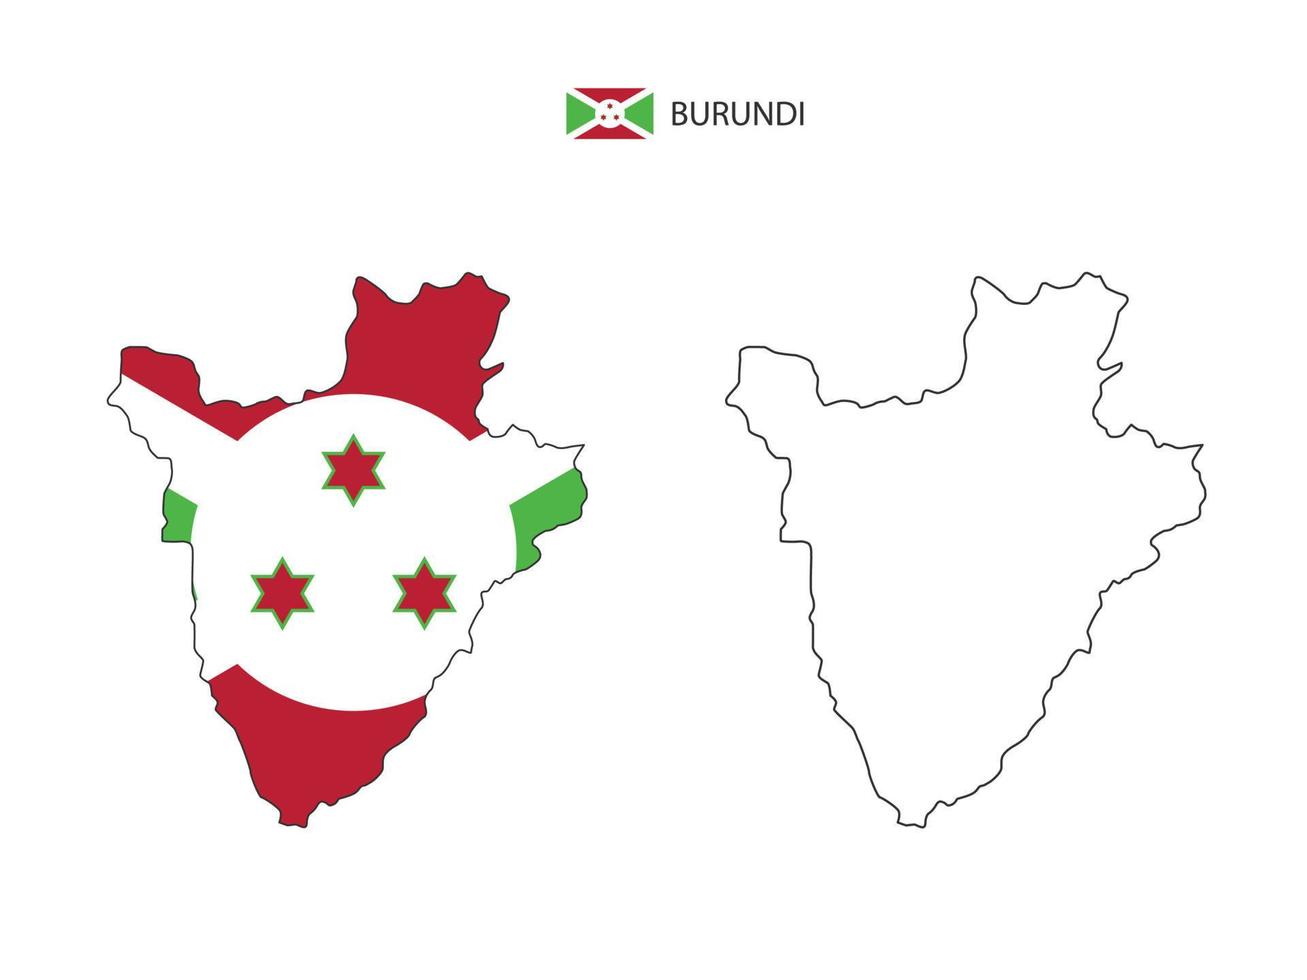 Burundi map city vector divided by outline simplicity style. Have 2 versions, black thin line version and color of country flag version. Both map were on the white background.